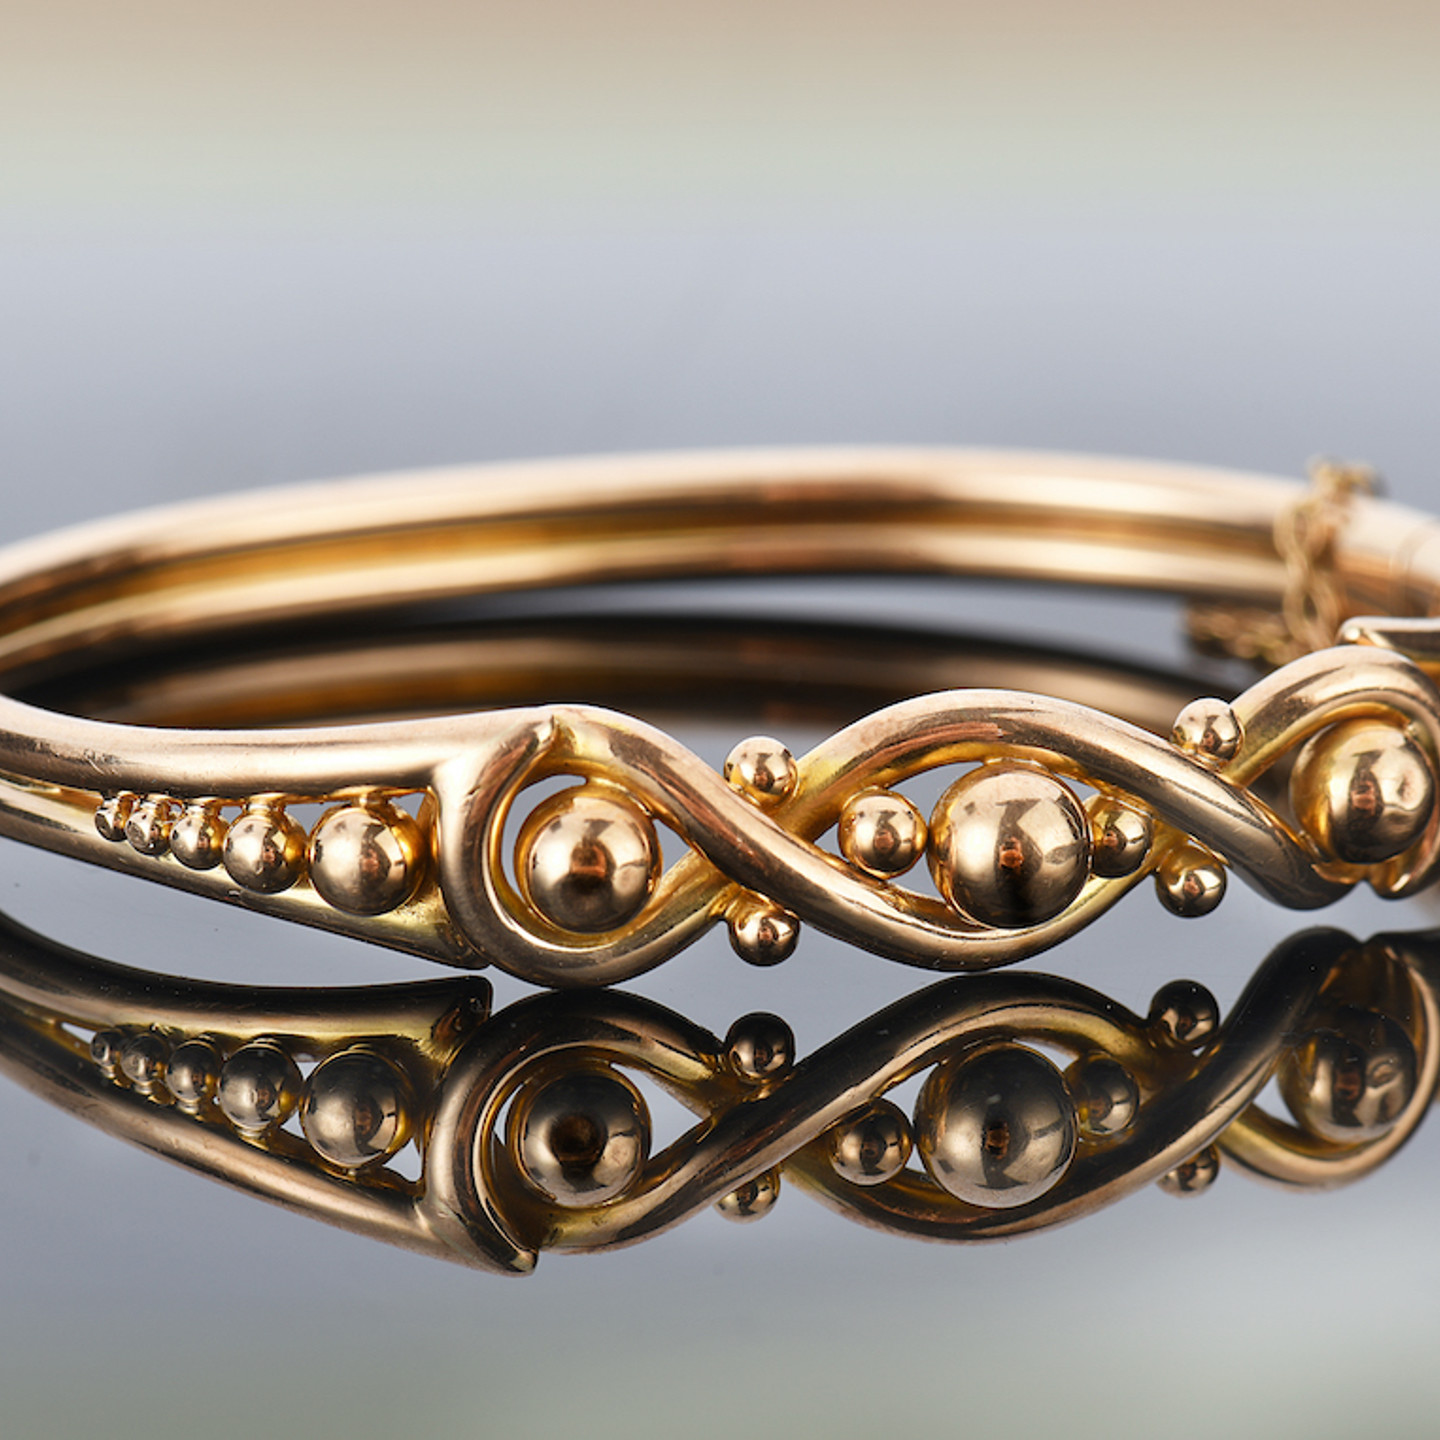 Victorian 9Ct Gold Bangle. Sold For £600